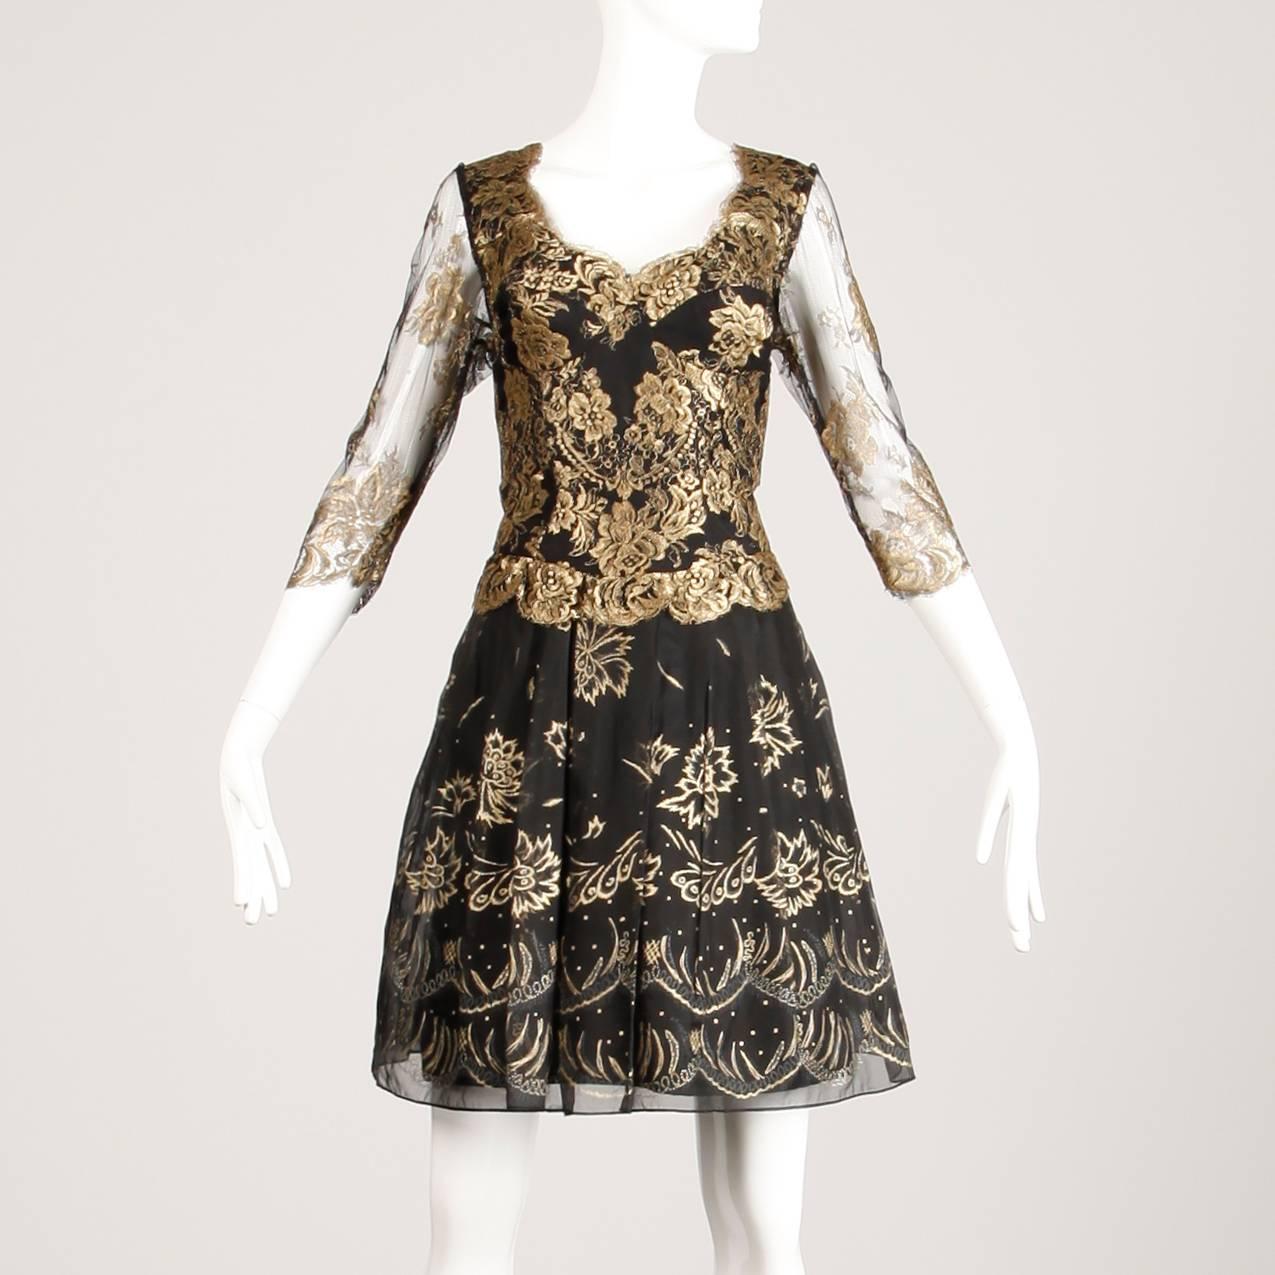 Stunning vintage black and metallic gold lace and silk dress by Zandra Rhodes. Hand painted skirt and sheer sleeves. Fully lined with rear zip and hook closure. The marked size is medium and the dress fits true to size. The bust measures 36".